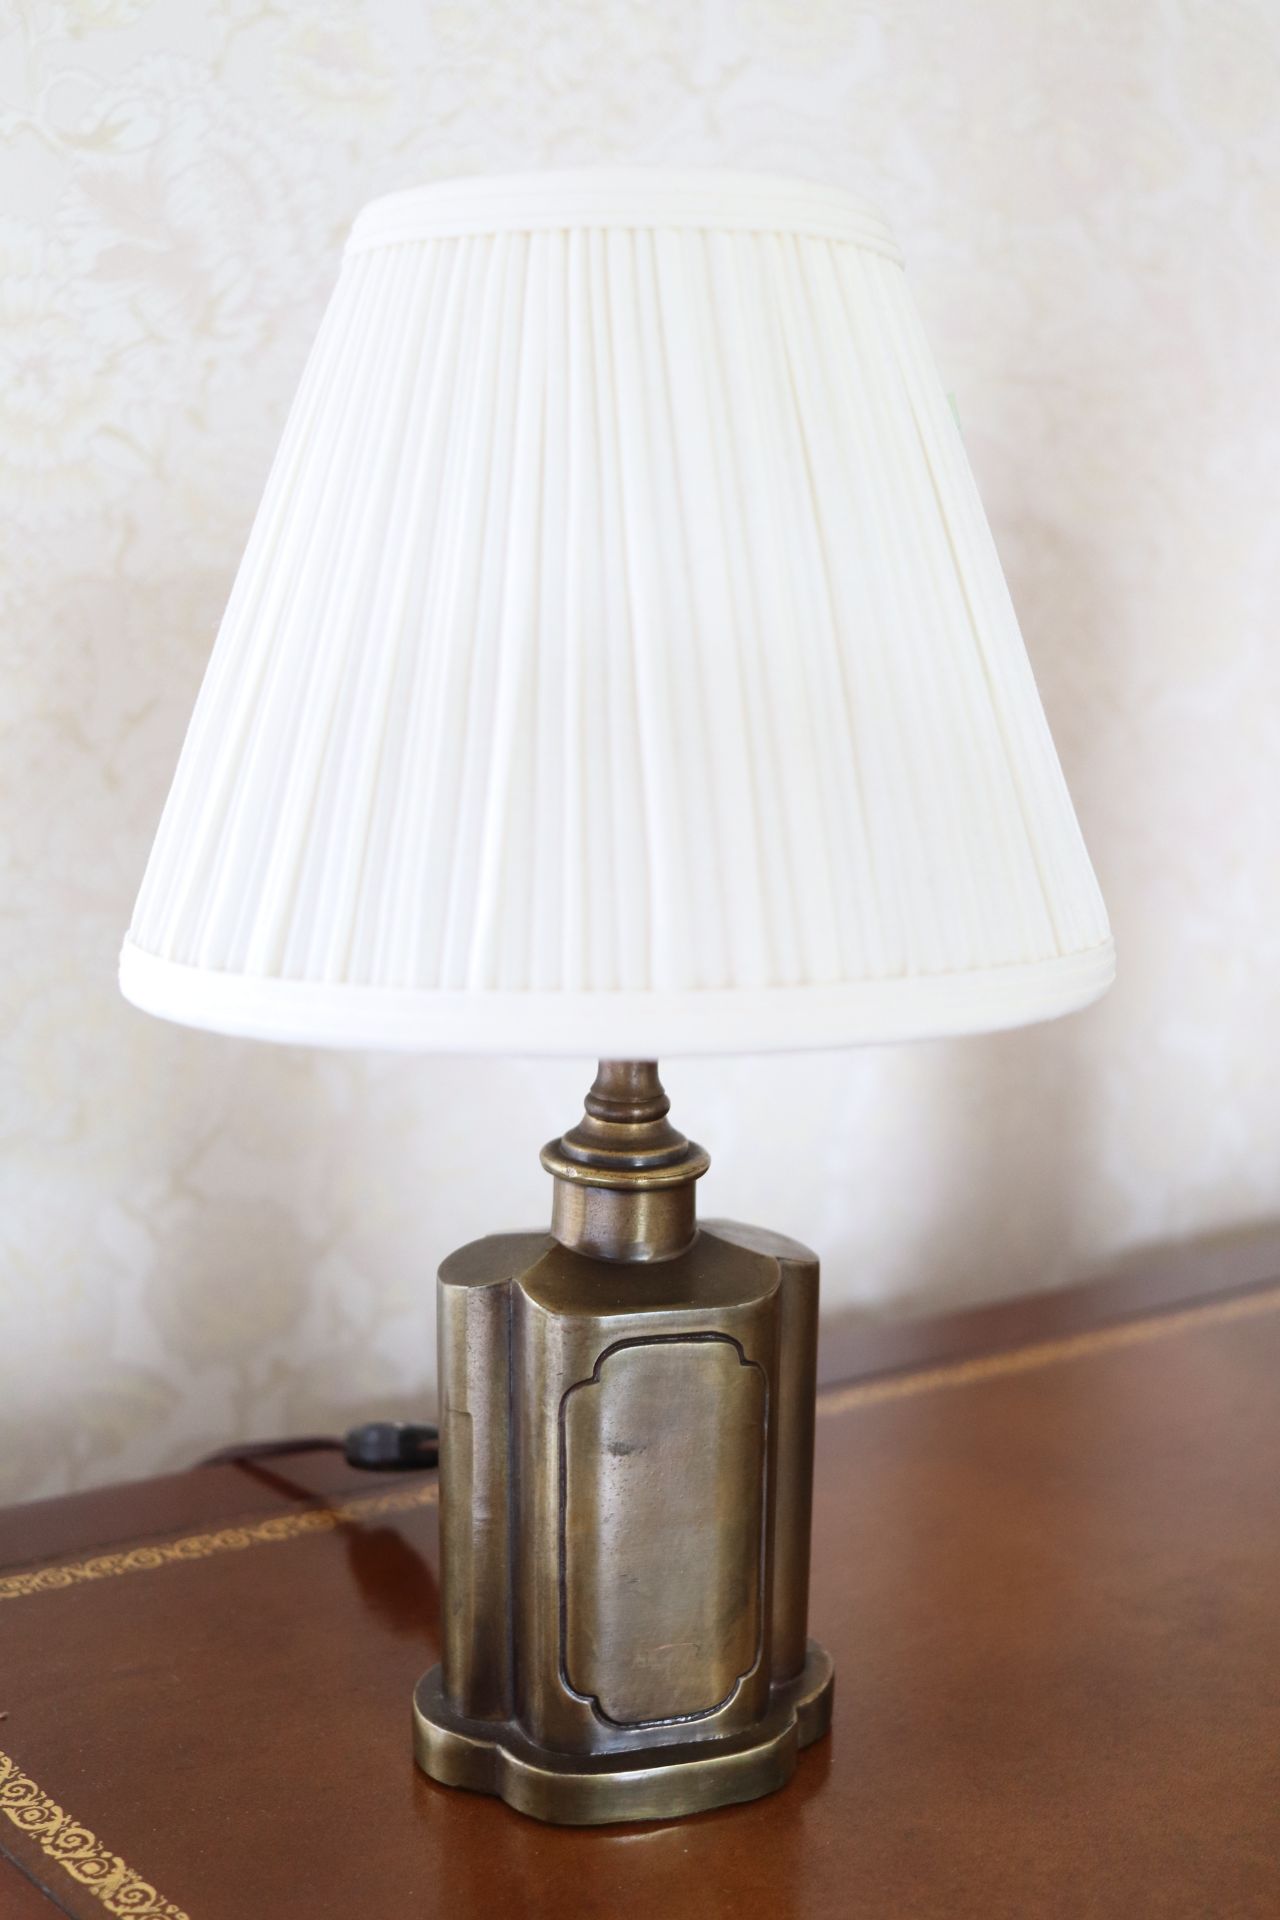 Brass table lamp, approximate height 13"